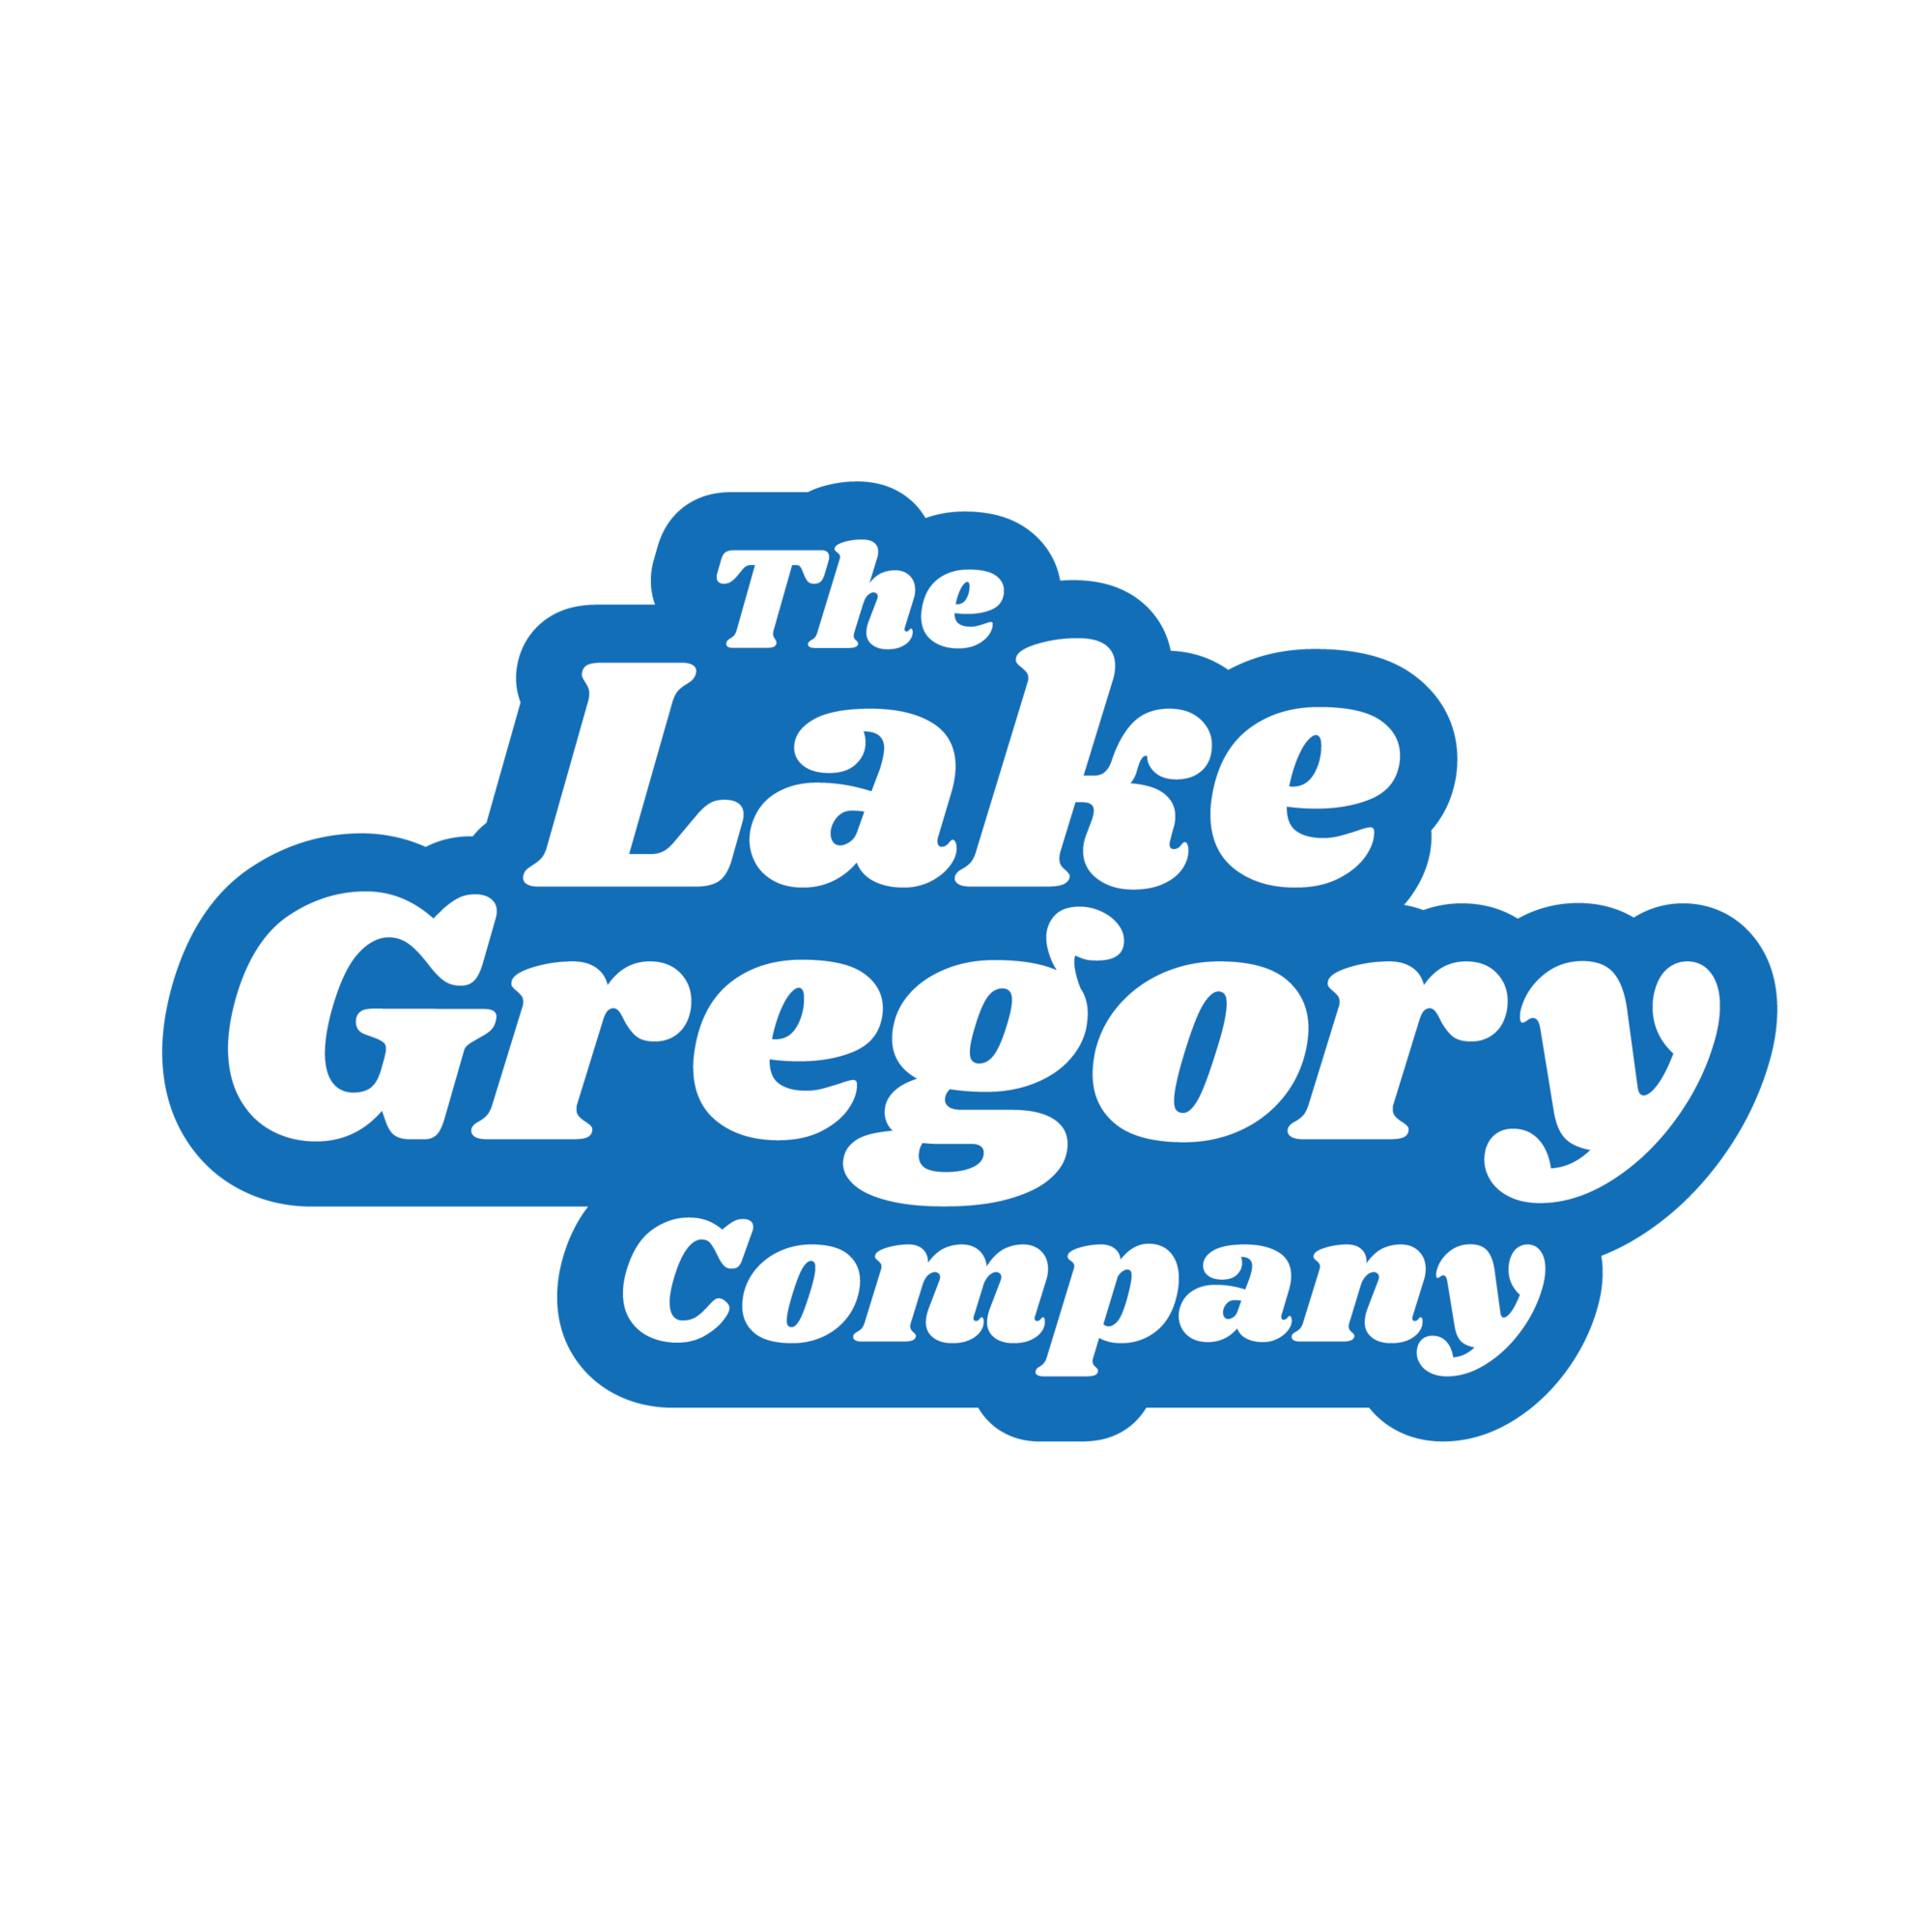 The Lake Gregory Recreation Co. logo in white puff cloud font with a blue outline.